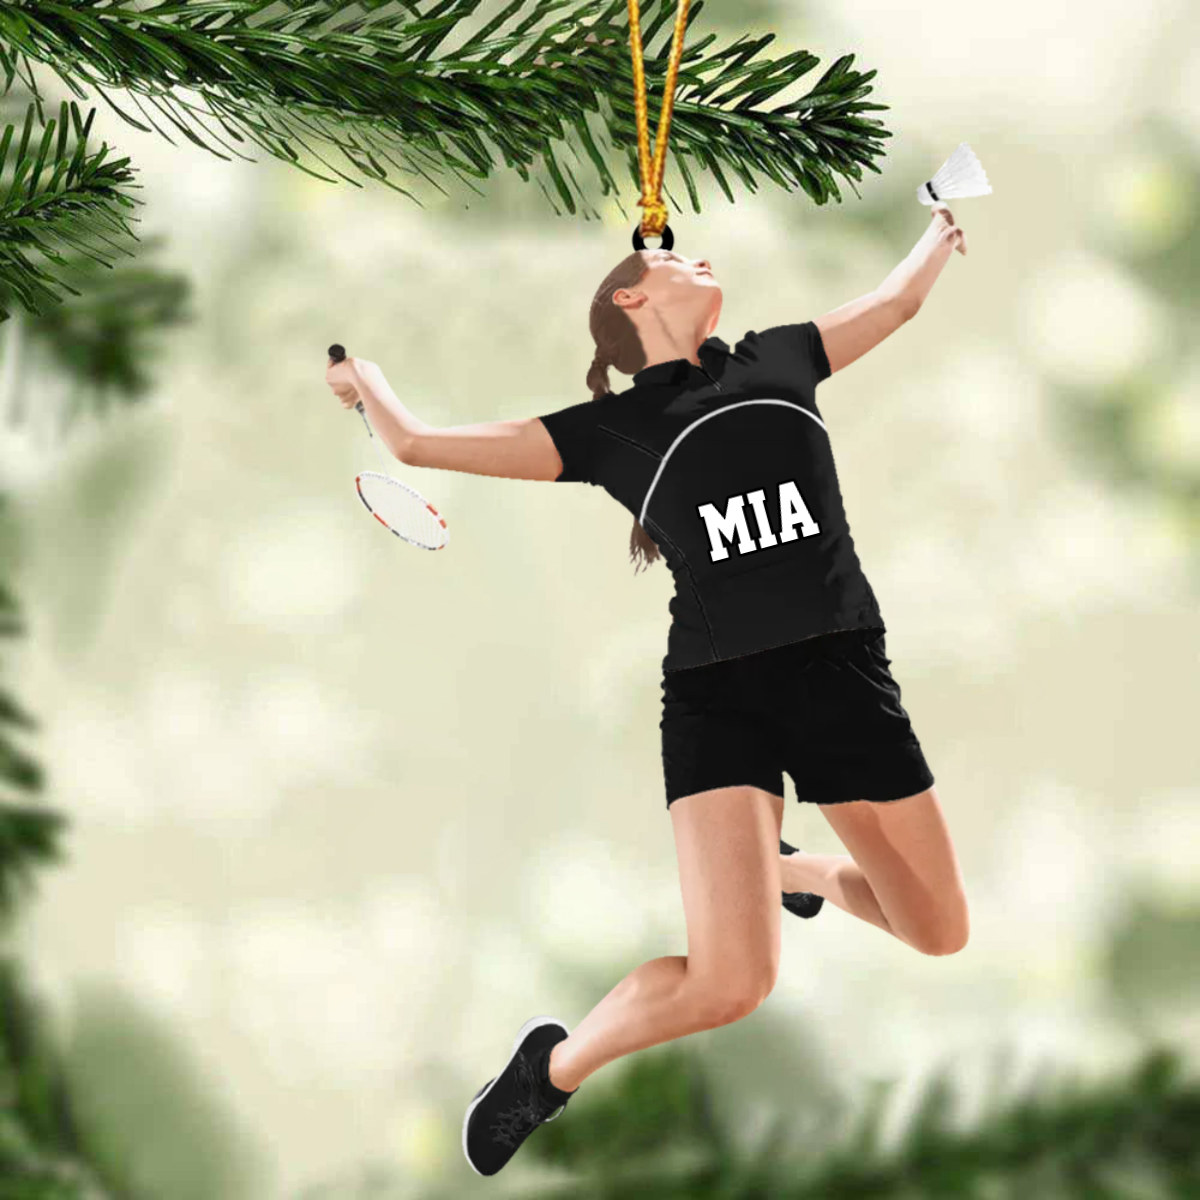 Custom Personalized Badminton Lovers Christmas Ornament/ Gift For Badminton Player